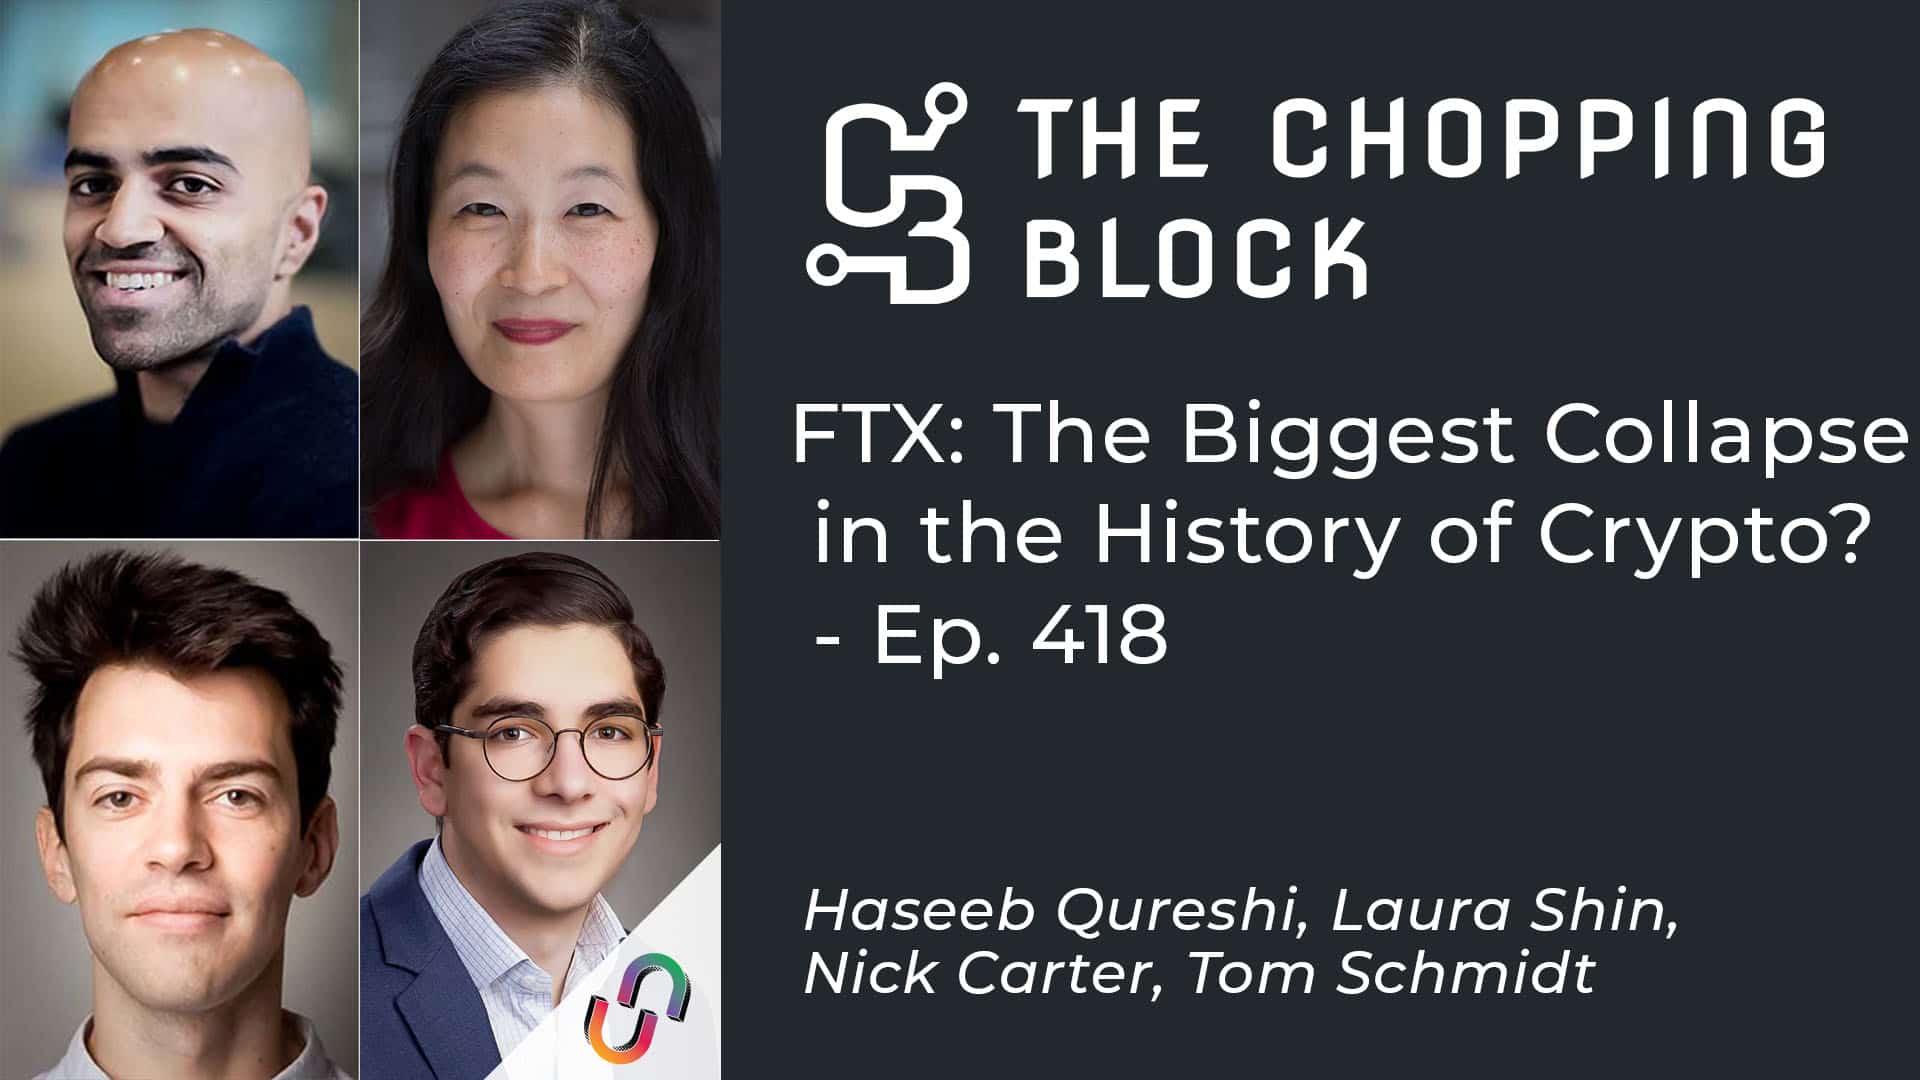 The Chopping Block: FTX: The Biggest Collapse in the History of Crypto? - Ep. 418